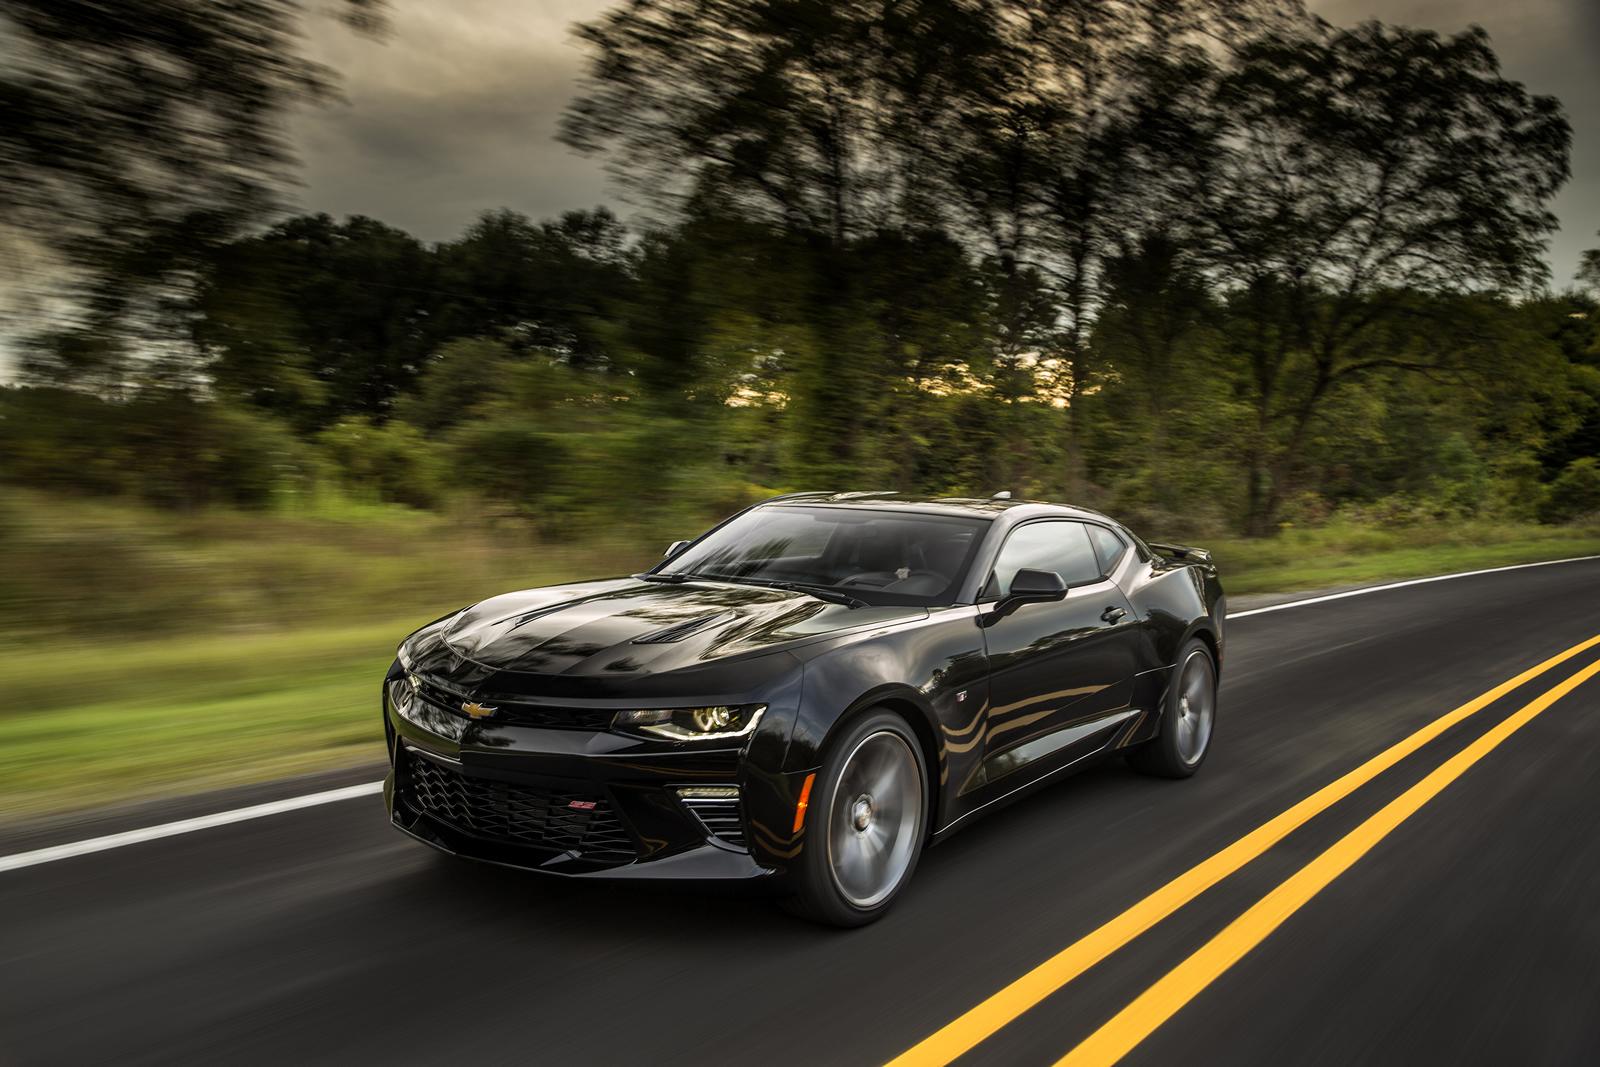 Chevrolet Camaro SS Wallpapers and Background Images   stmednet